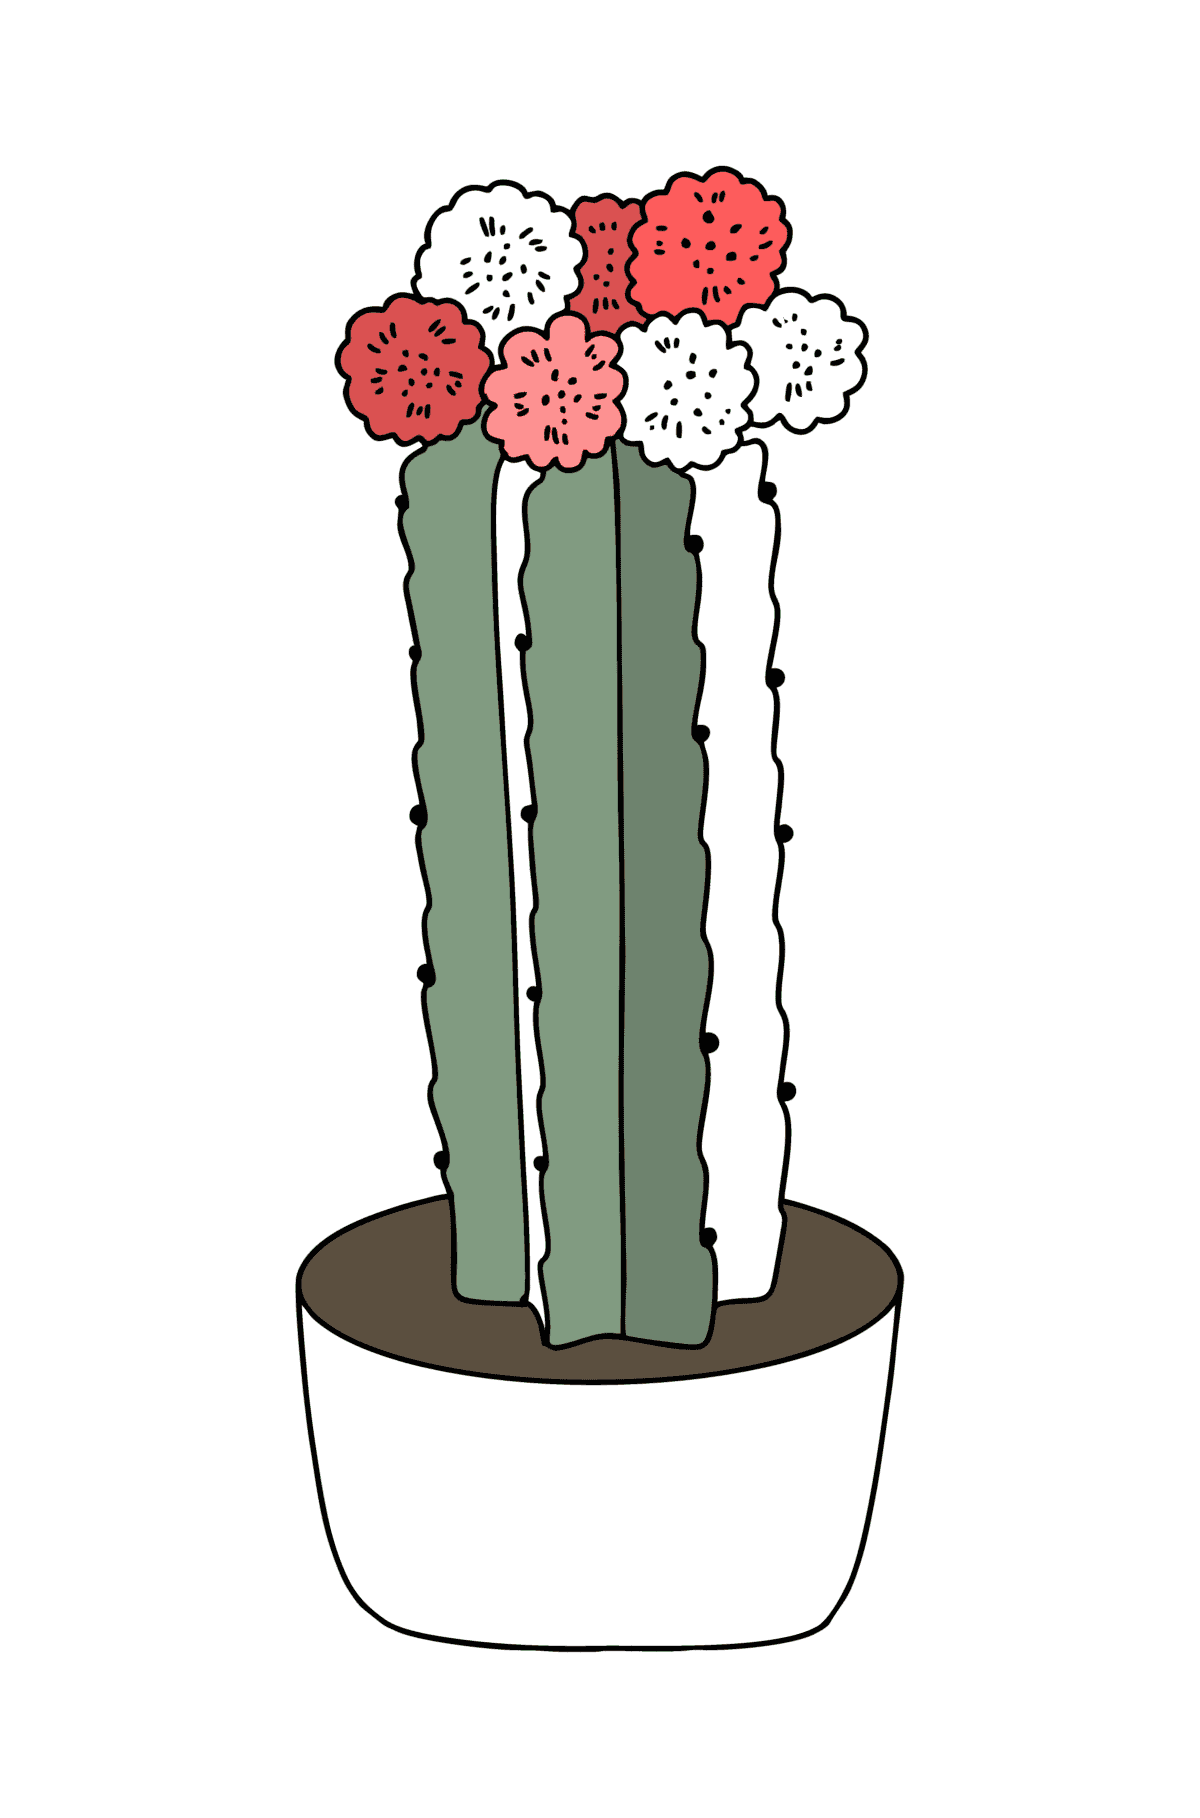 Cactus coloring sheet - Coloring Pages for Kids